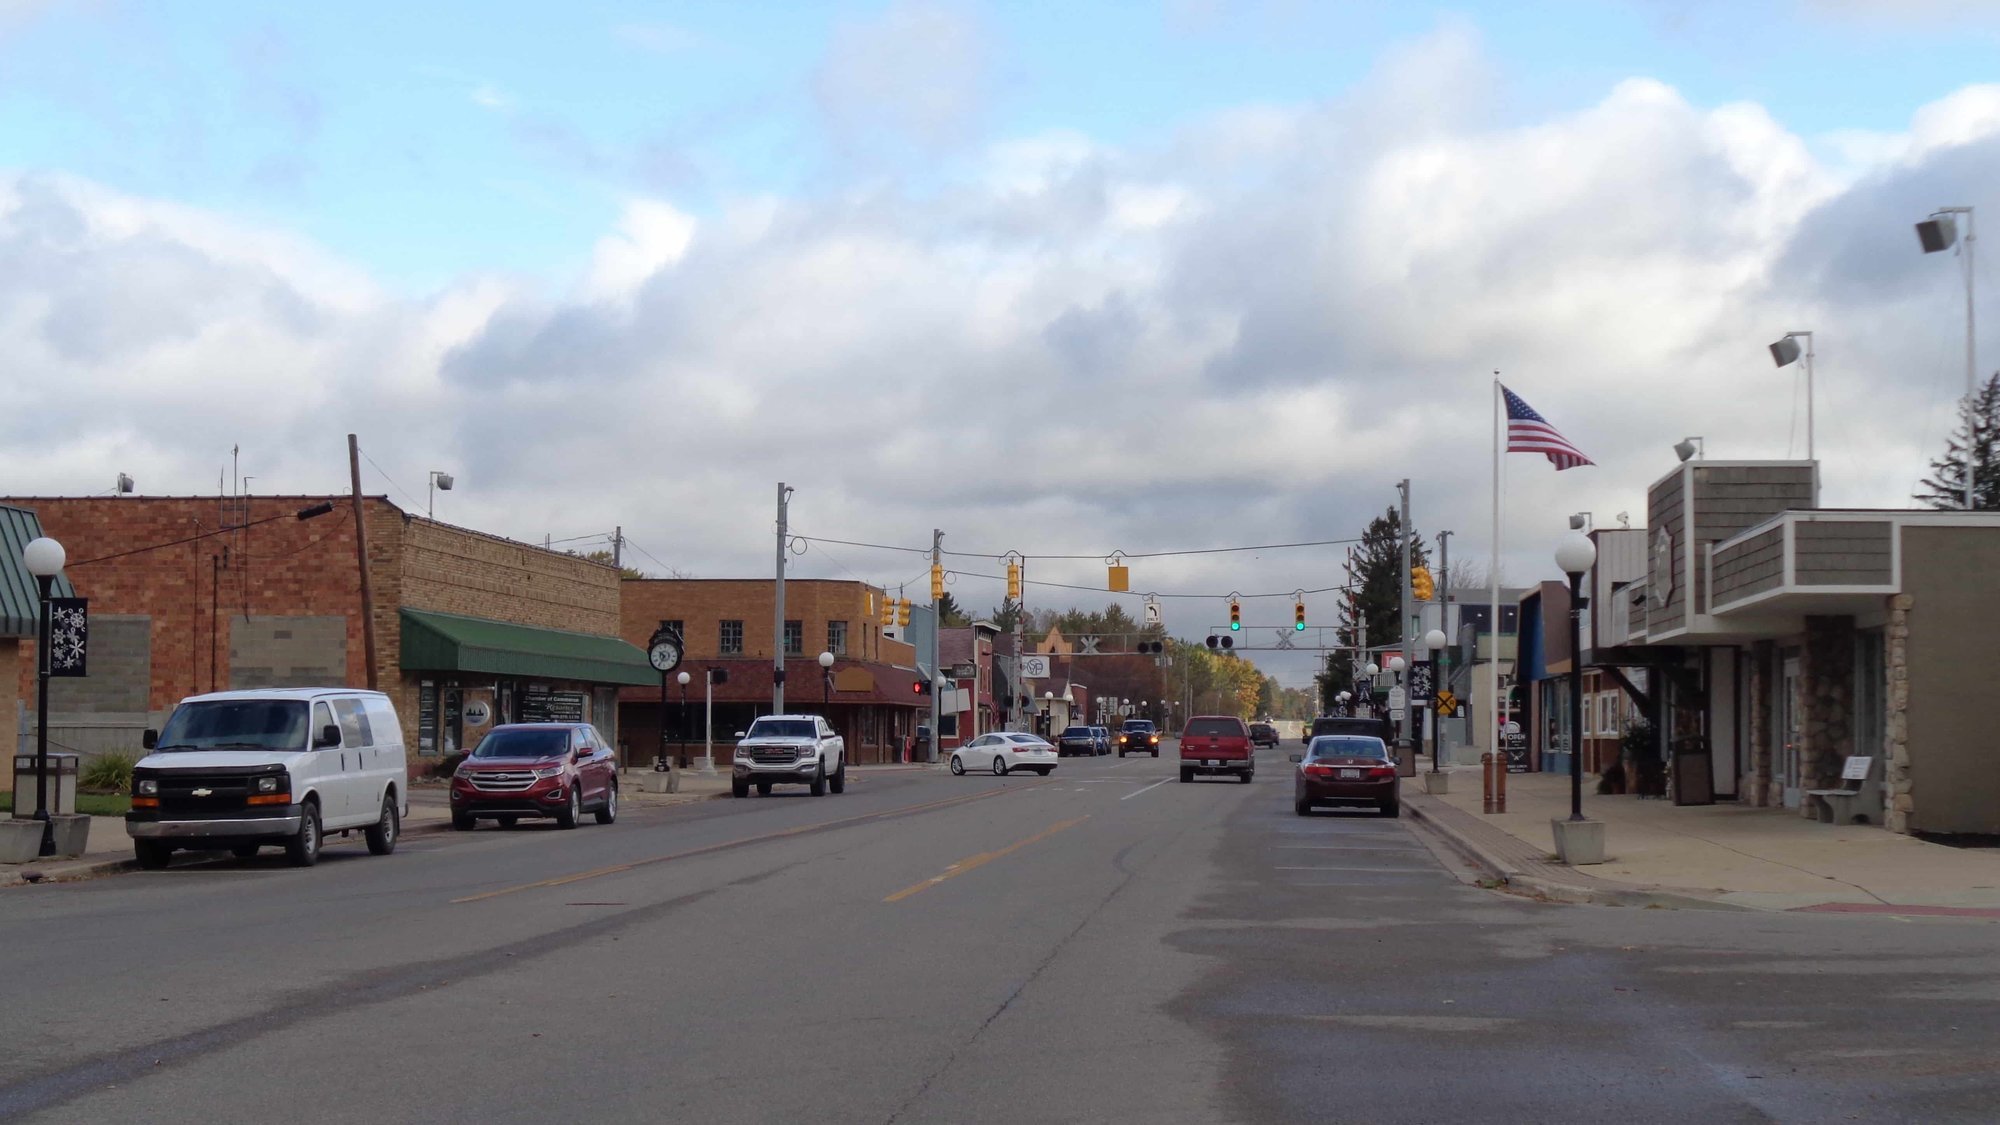 downtown Roscommon, michigan home